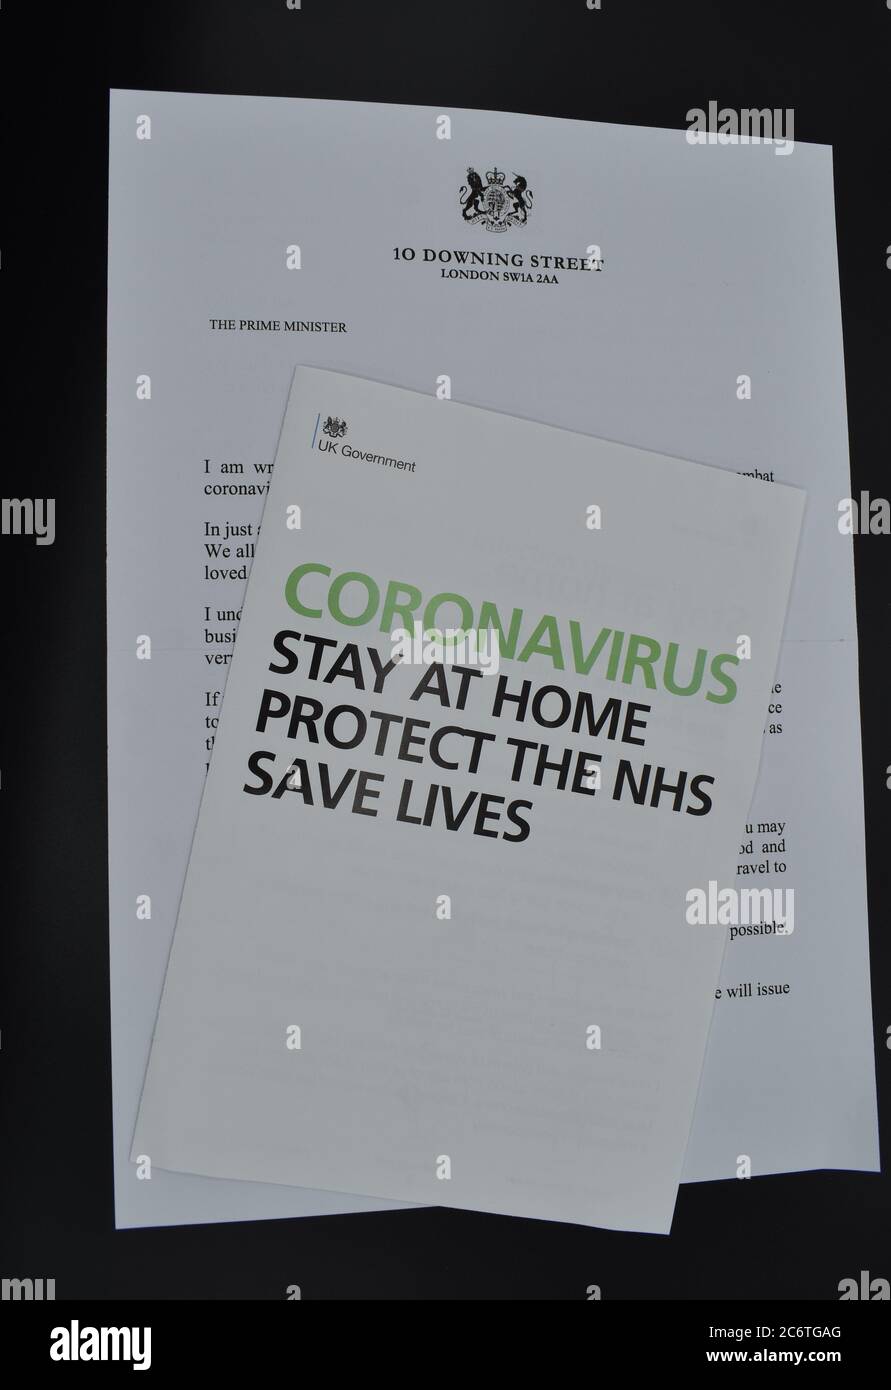 The Coronavirus leaflet and letter from 10 Downing Street distributed to homes in the UK at the beginning of lockdown for Covid-19. Stock Photo